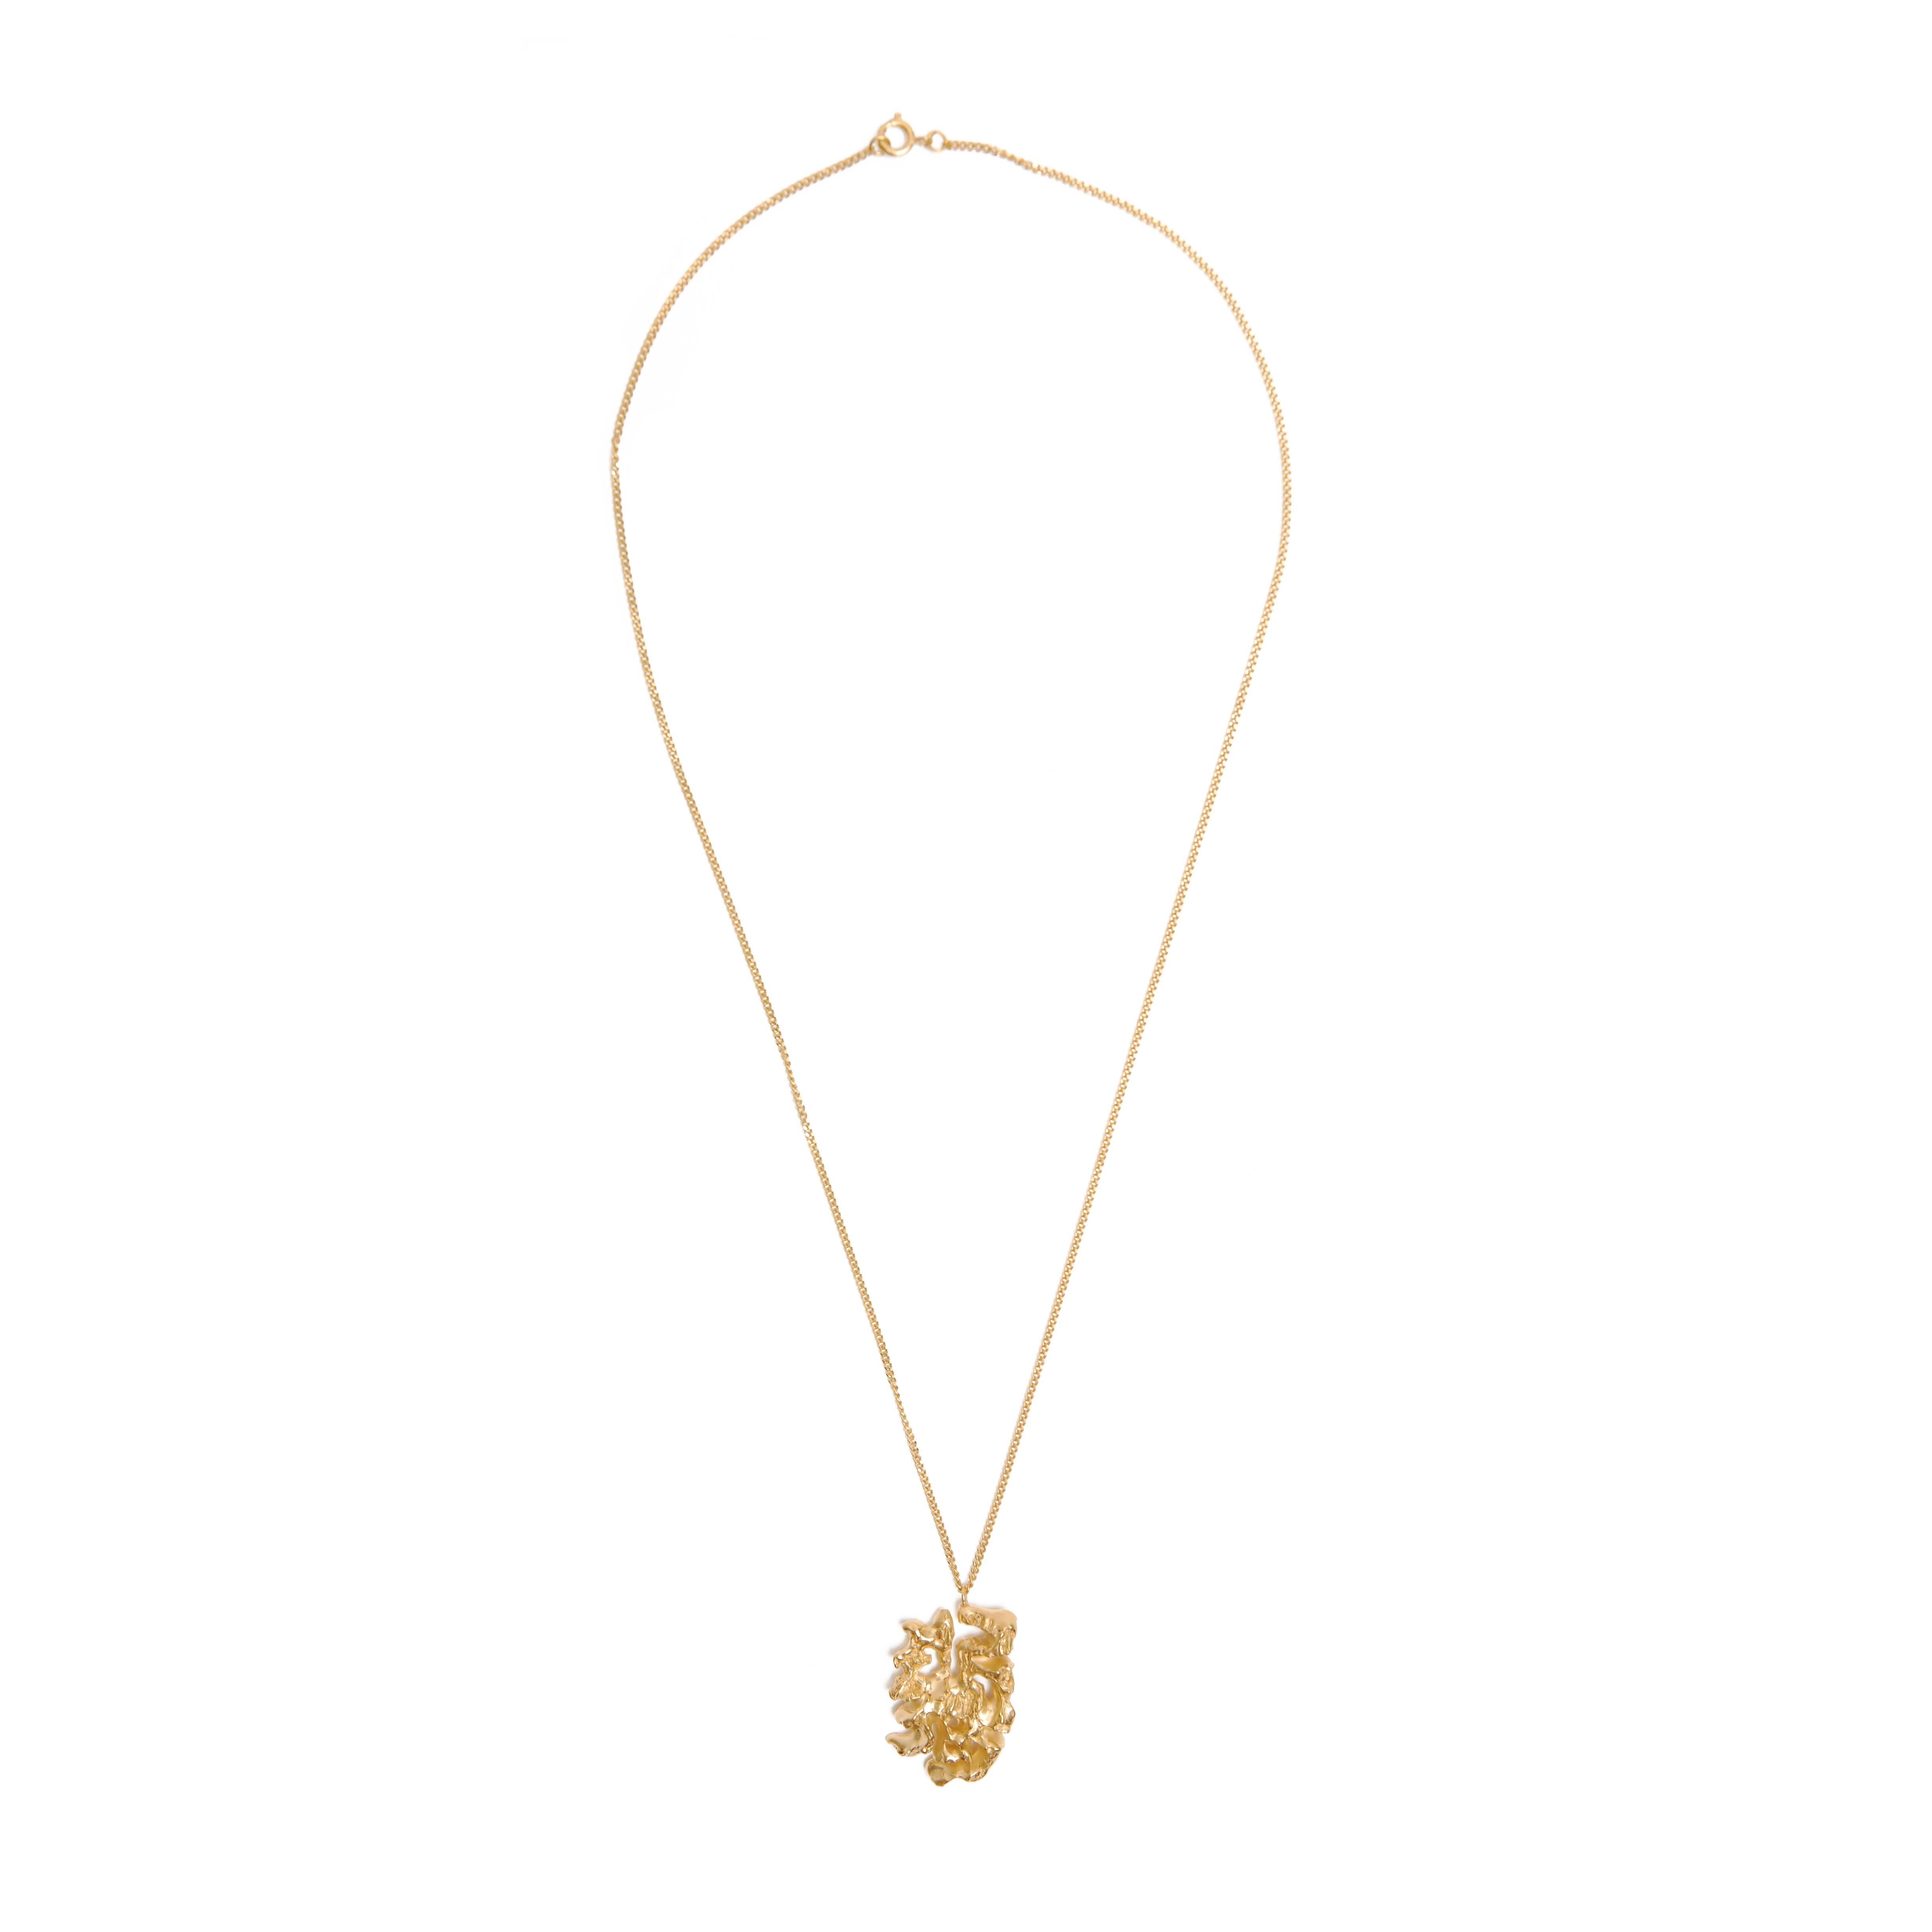 The Chinese zodiac Dog necklace is influenced by the ancient Chinese calligraphy character of Dog (Gou 狗), the eleventh of the twelve signs of the Chinese zodiac. Those born in the year of the Dog are renowned for their earnestness and devotion, and